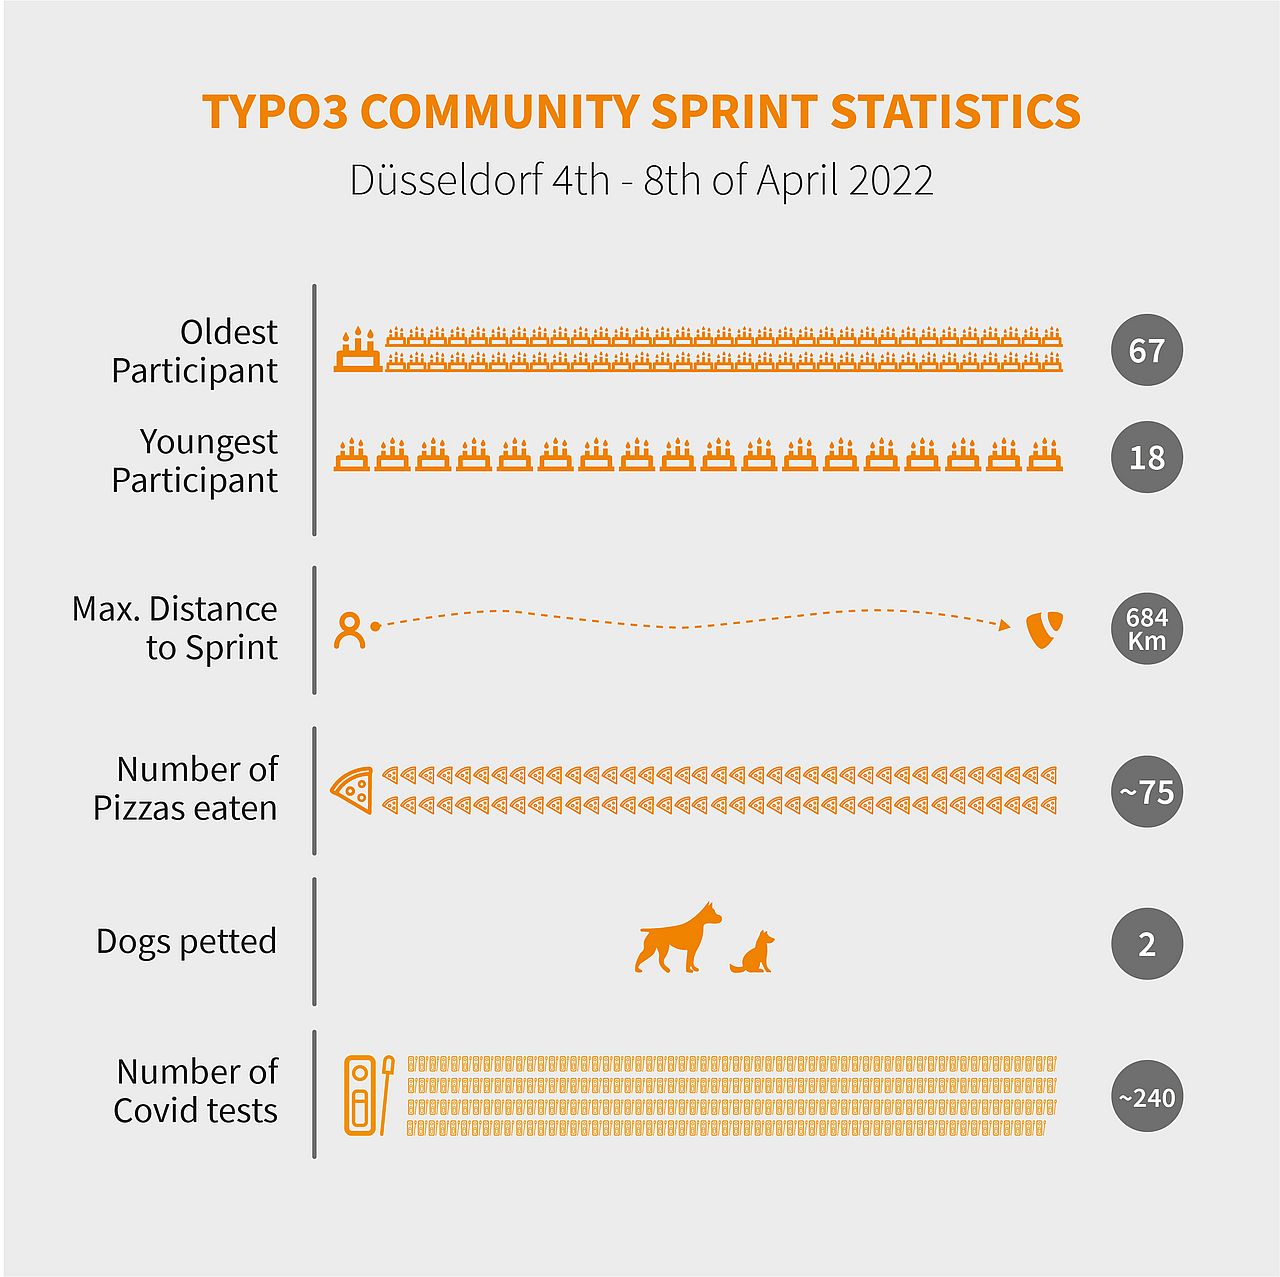 Sprint Statistics visualized: Oldest Participant 67, Youngest 18, 2 Dogs Petted, Maximum Distance Driven was nearly 600km and we ate about 75 pizzas and took 240 covid tests.